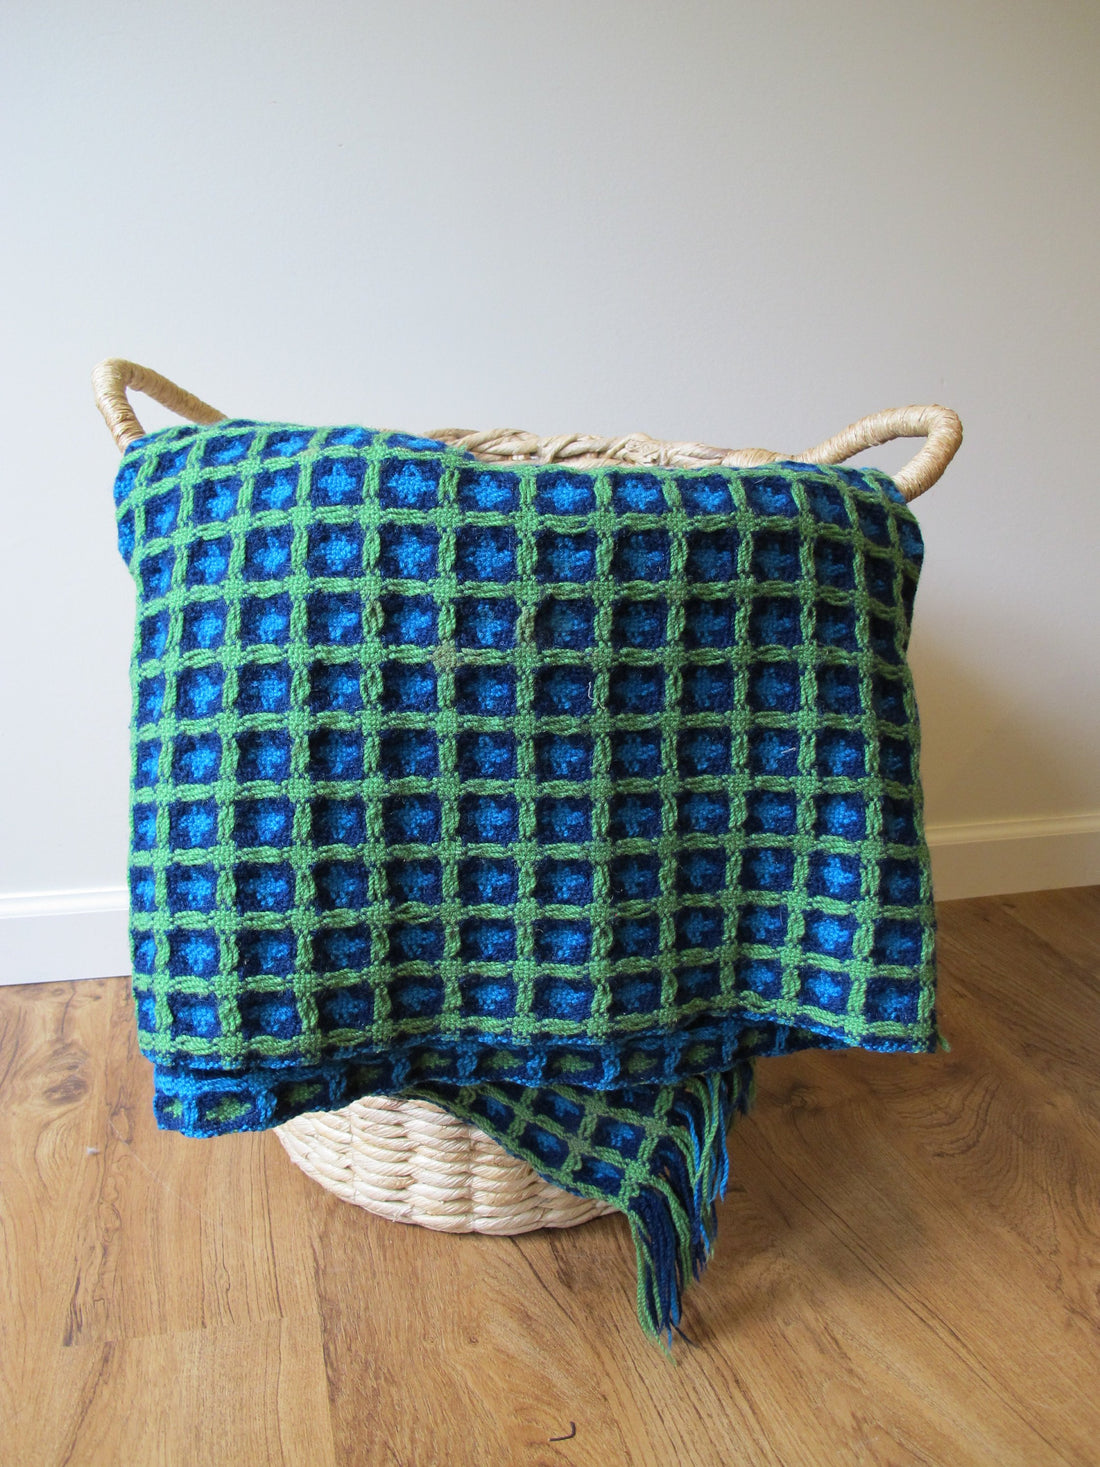 Vintage Pendleton Woolen Mills Woven Wool Double Sided Blanket/Throw - in Lime Green, Navy and Light Blue